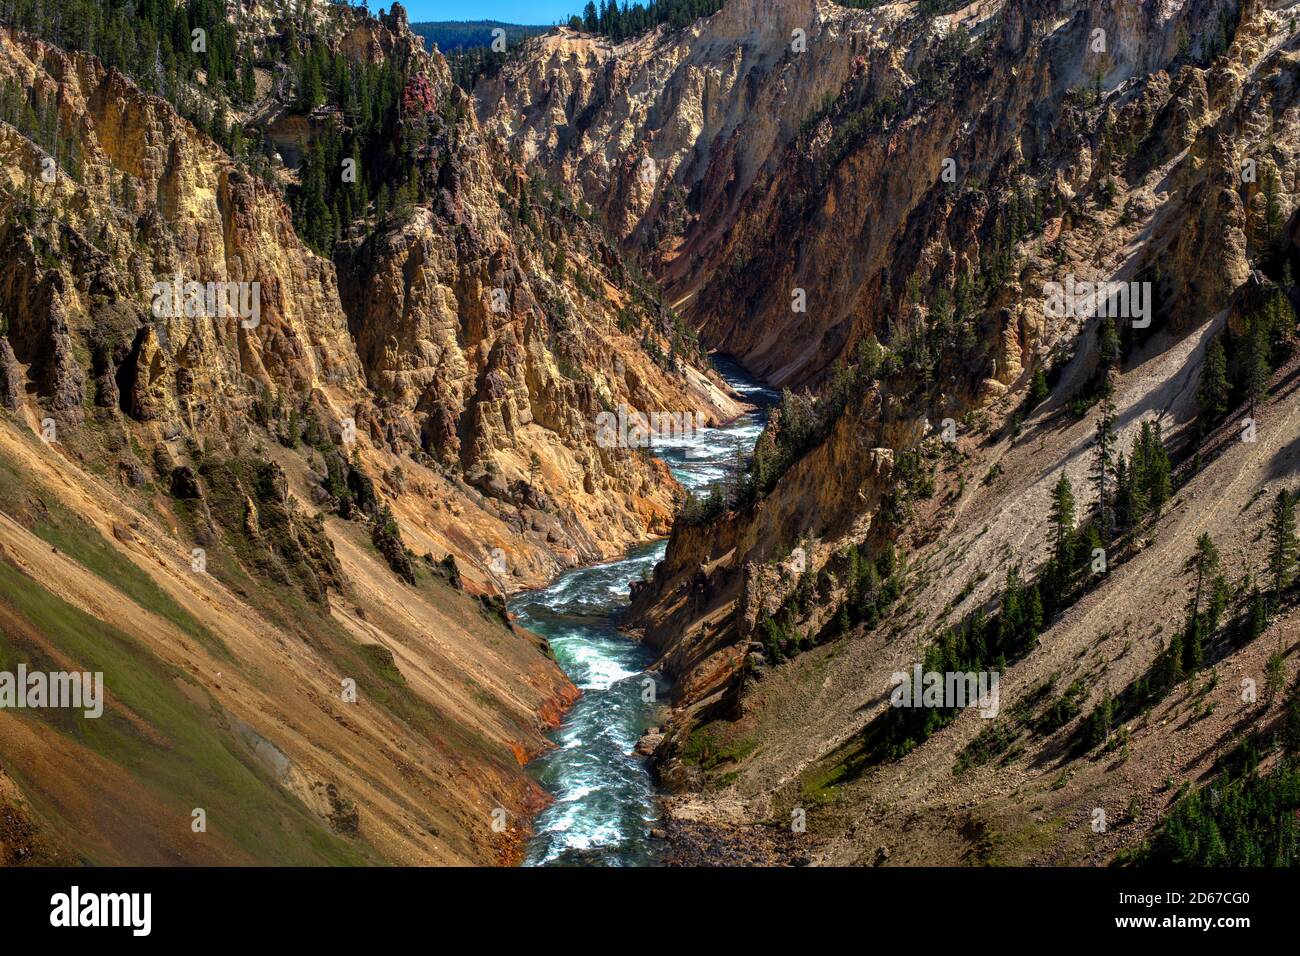 Yellowstone River from the Brink of the Lower Falls Trail, Grand Canyon of the Yellowstone, Yellowstone National Park, Wyoming, USA Stock Photo